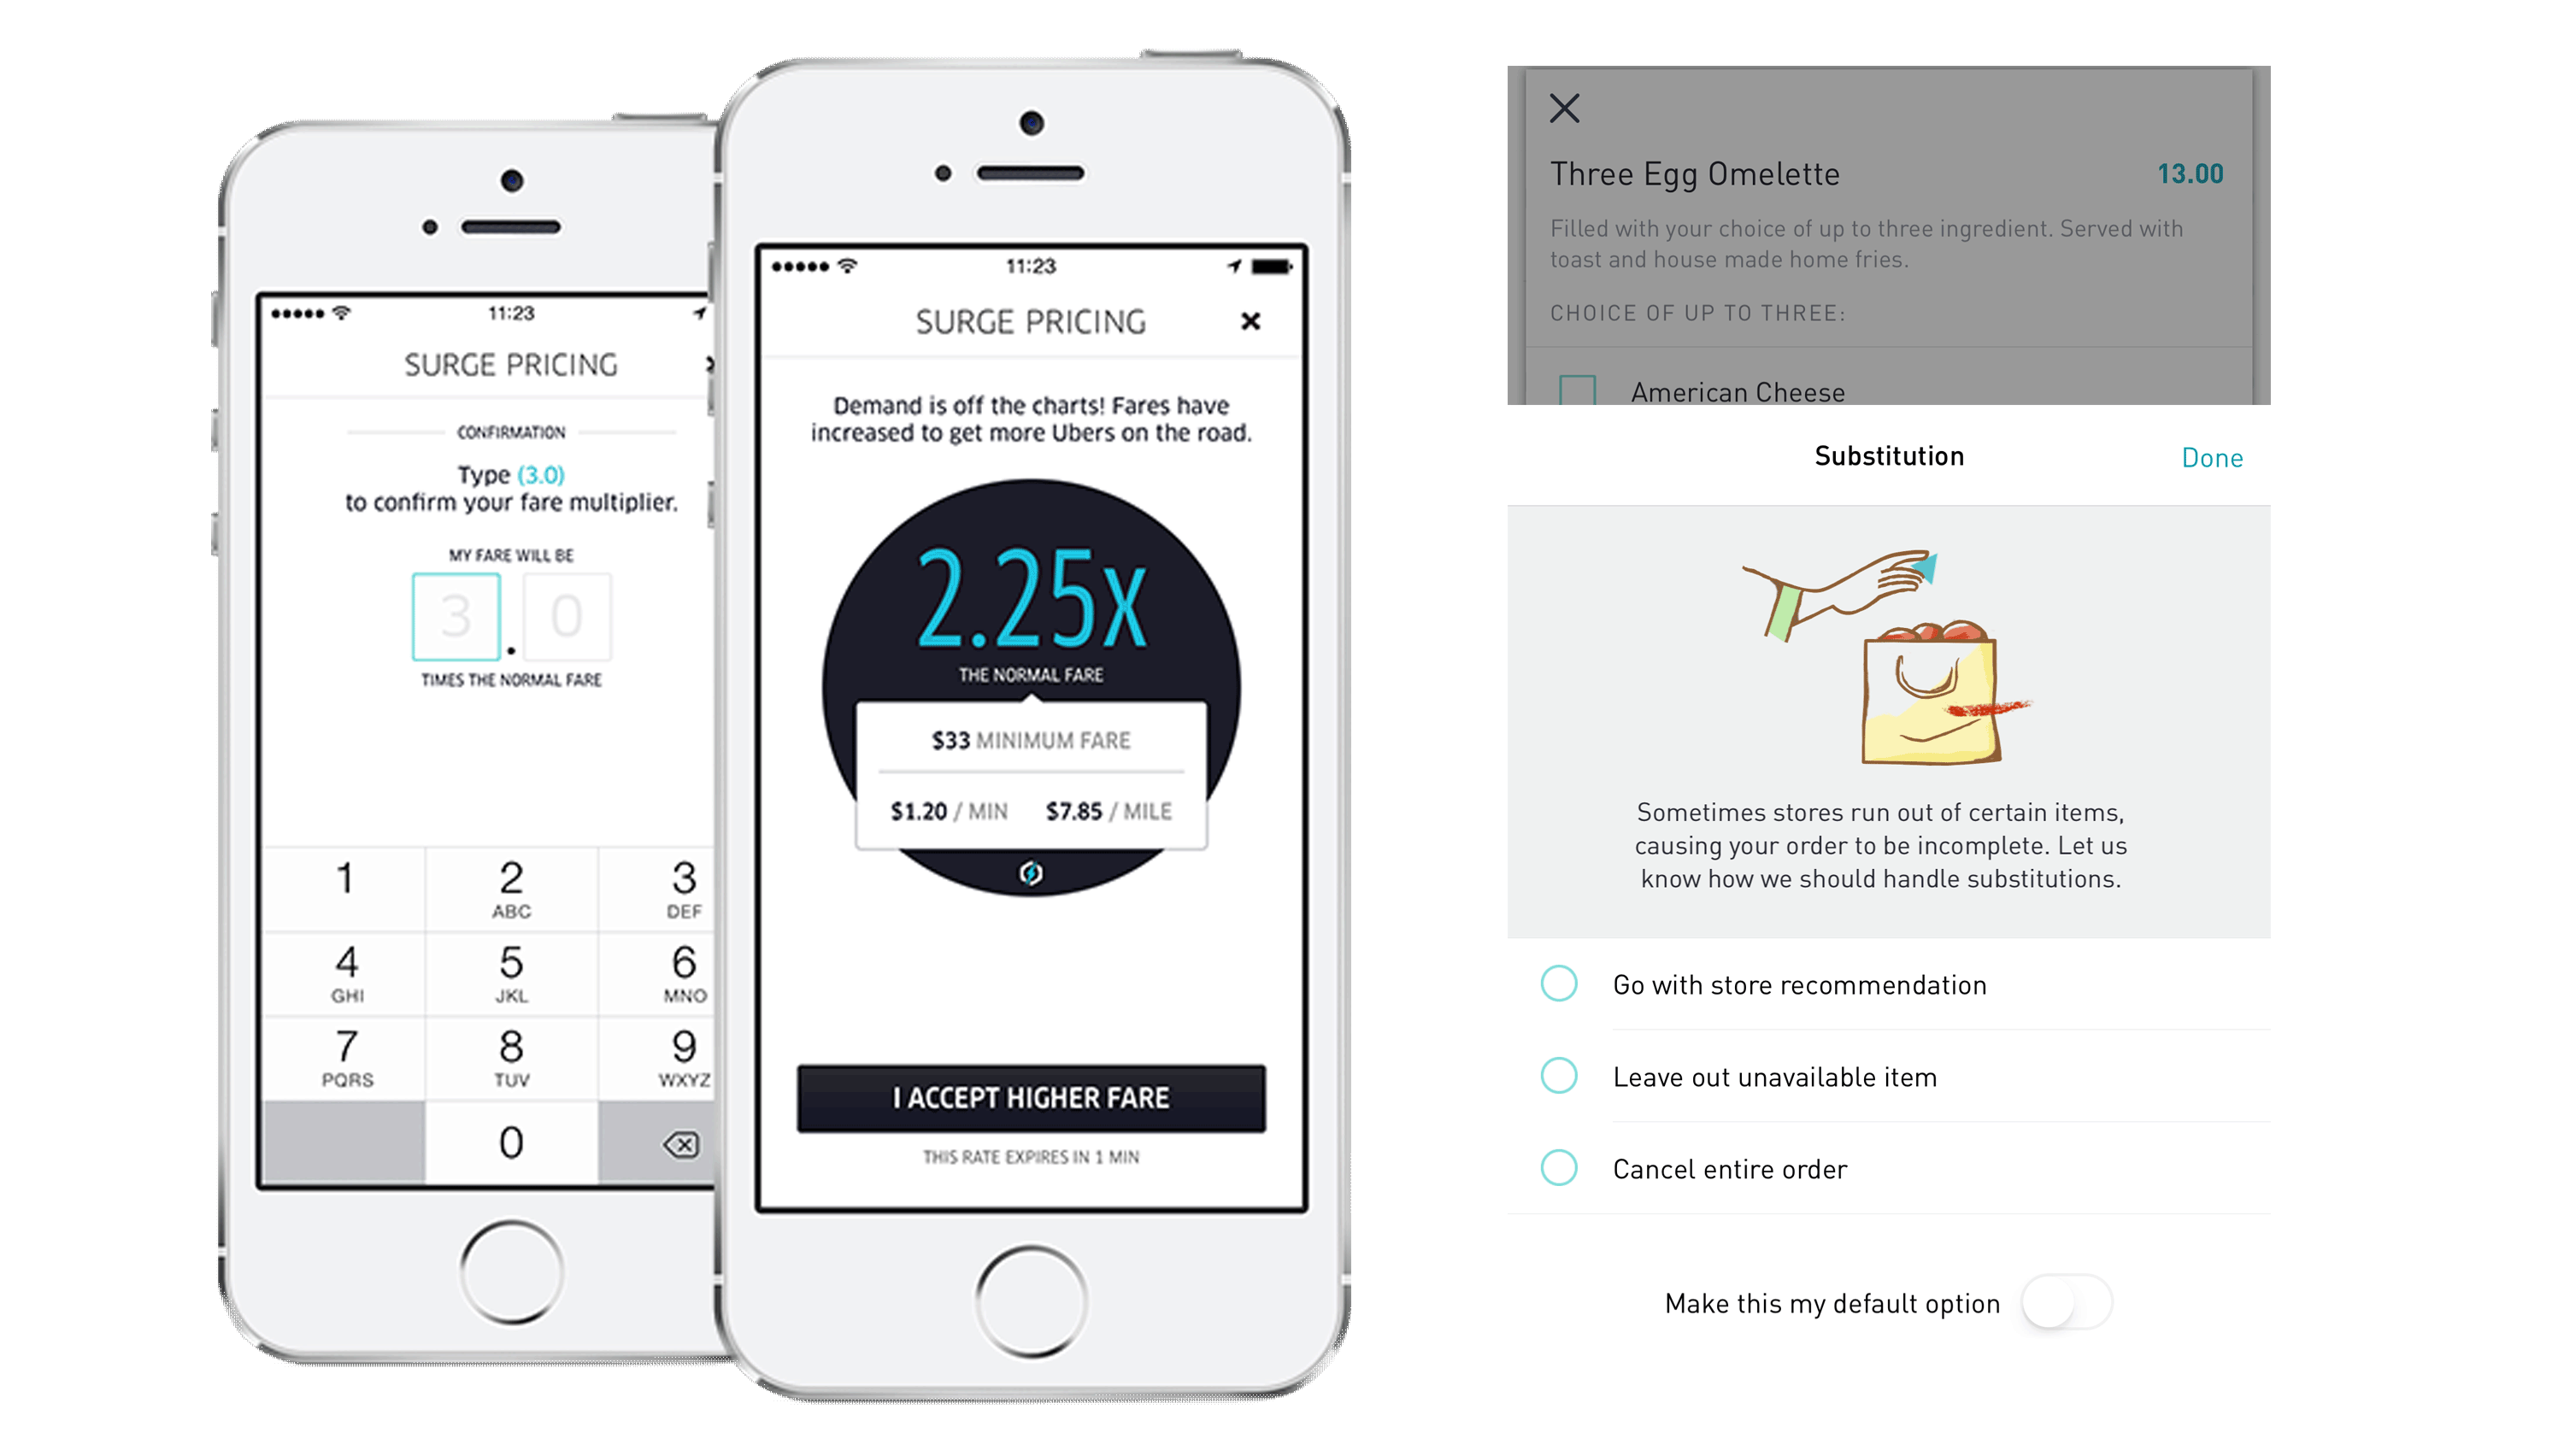 uber-surge-pricing-example-postmates-item-substitution-example